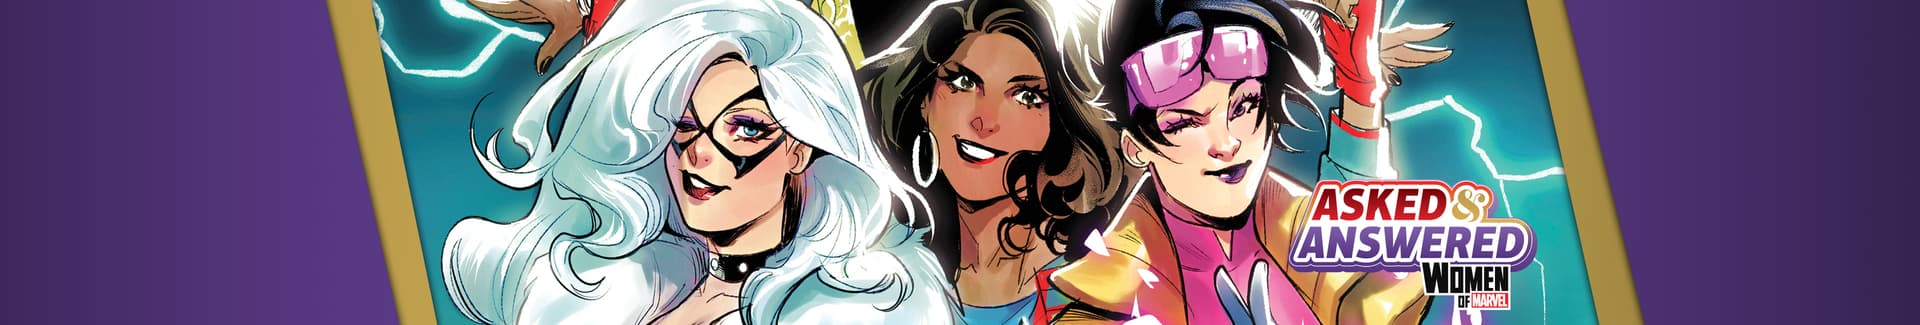 Asked & Answered with the Women of Marvel Comics